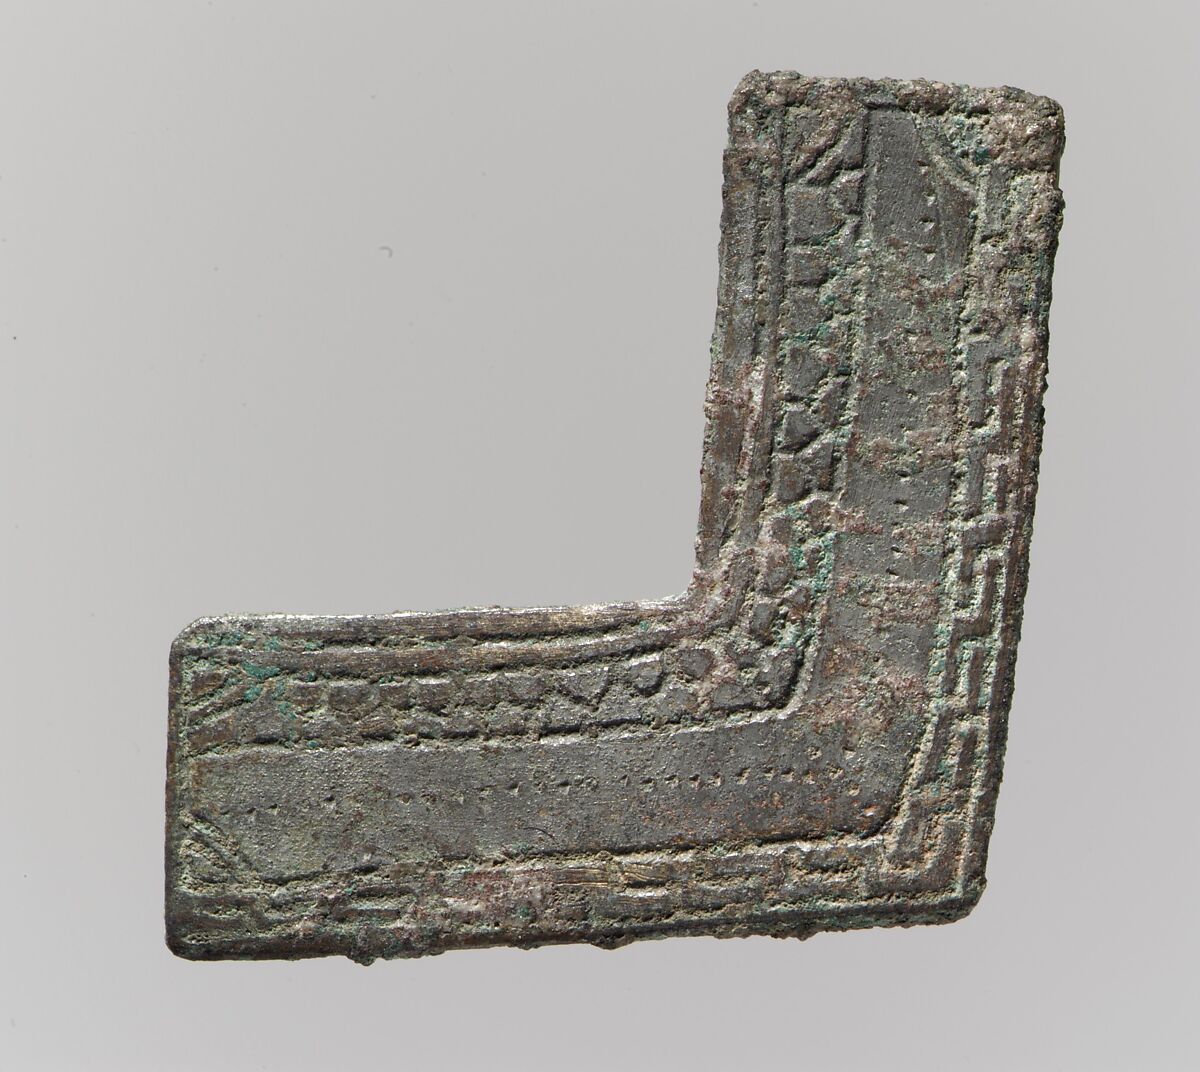 Flat Ornament, Copper alloy, "tinned" surface, Frankish 